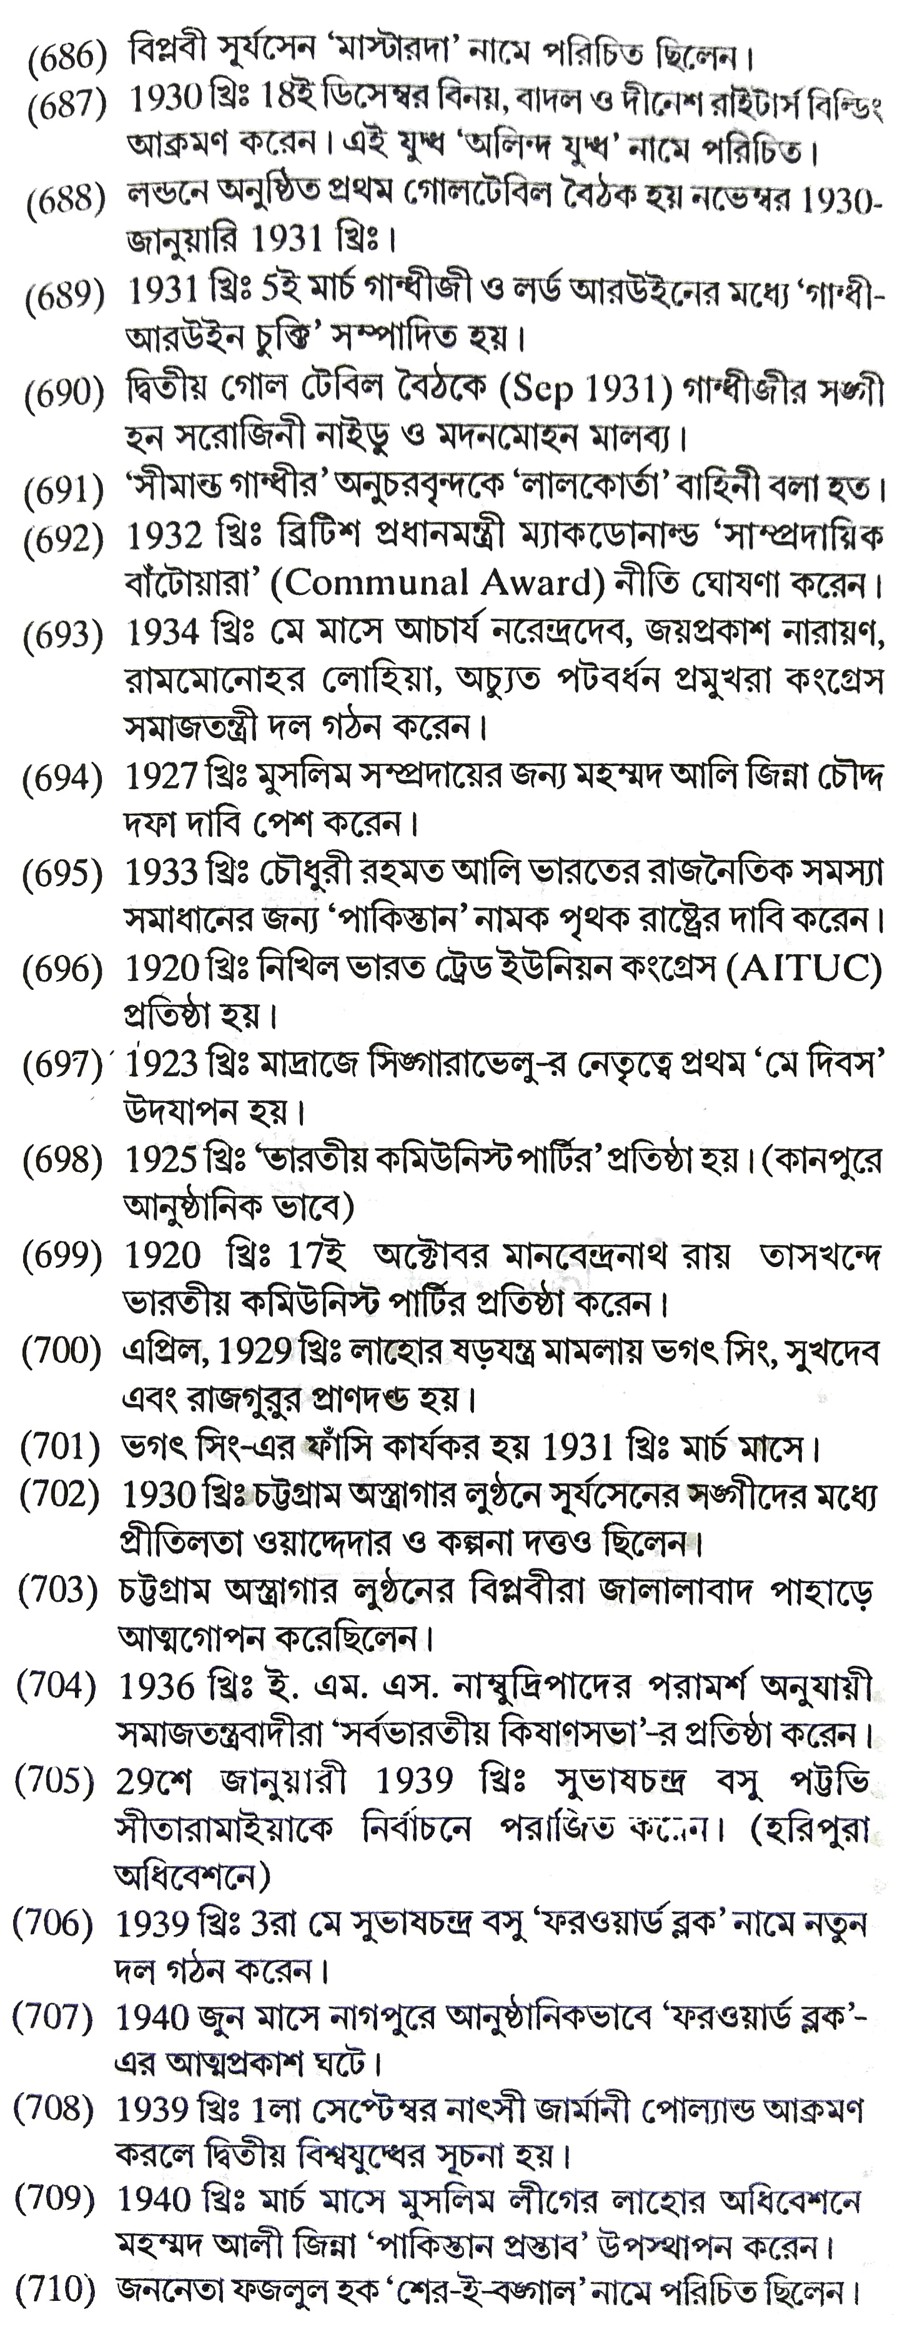 History of India-770+ One-liner Question Answer - WBCS Notebook